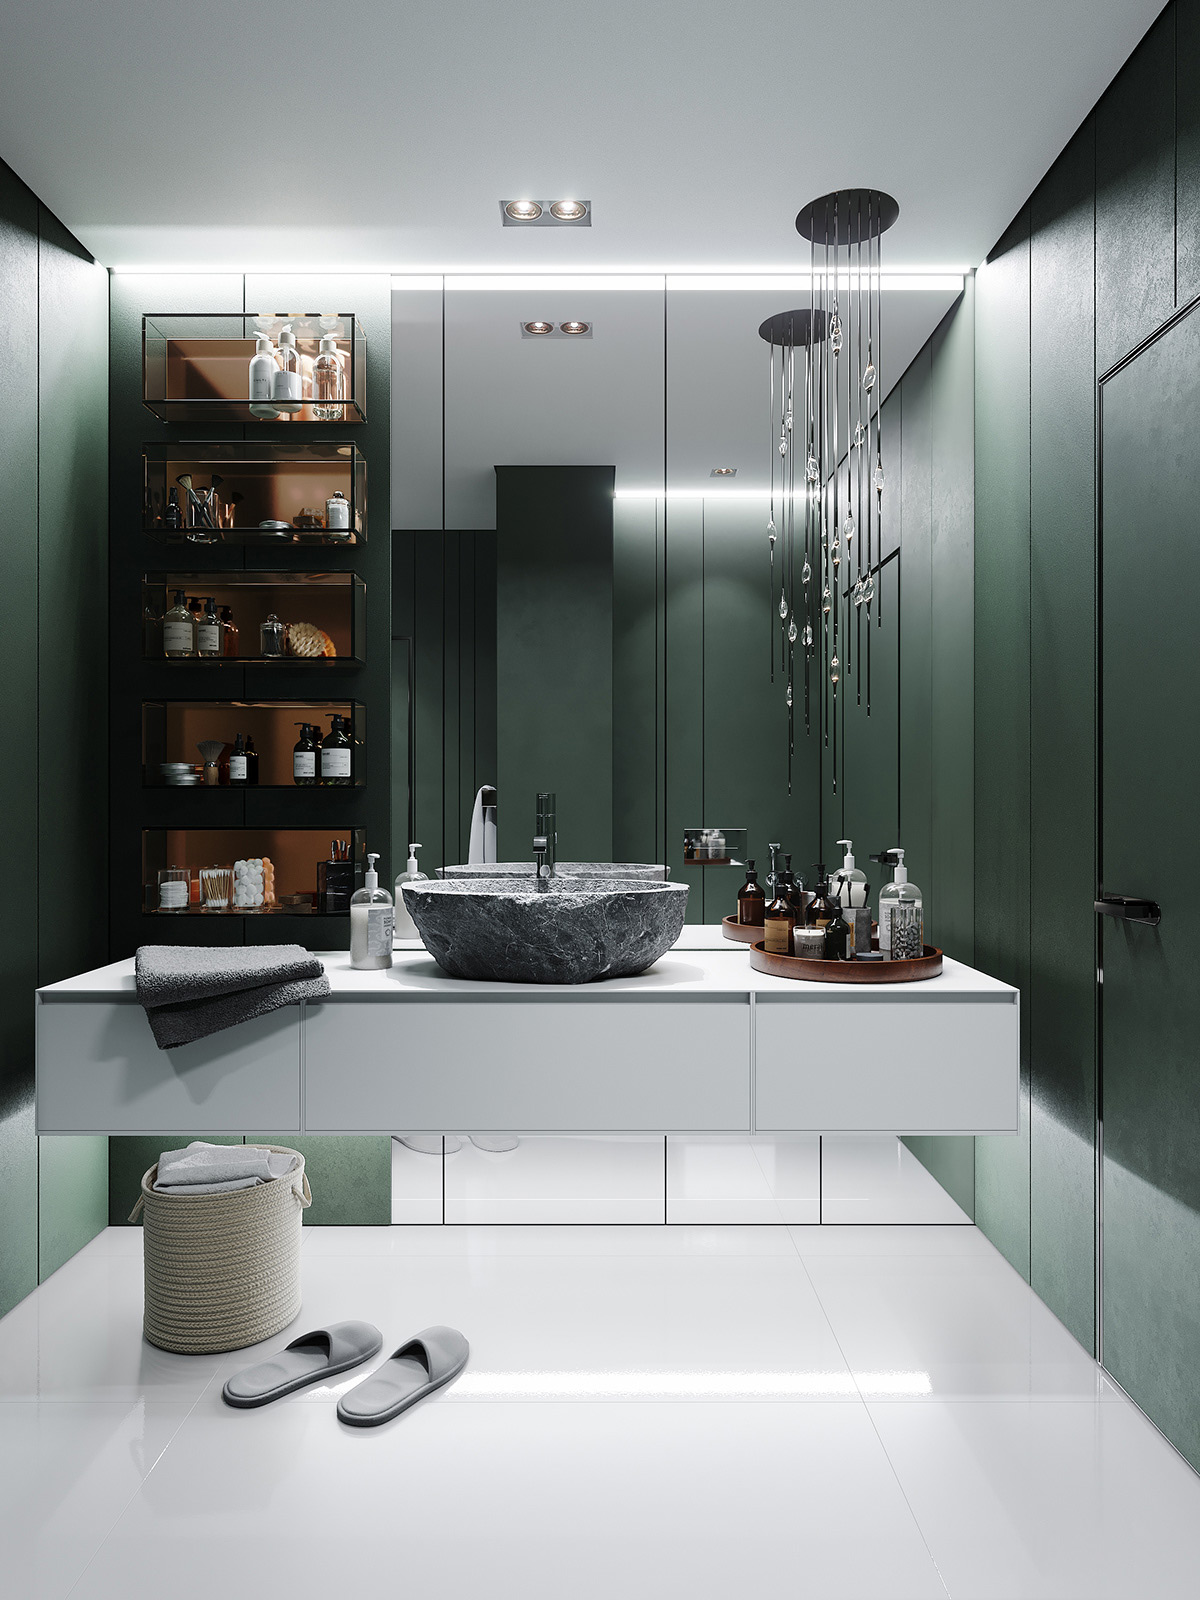 Construct a sleek, tailored perimeter using dark green wall paneling. A solid white floor, vanity unit, and ceiling prevent a small space from becoming dreary.